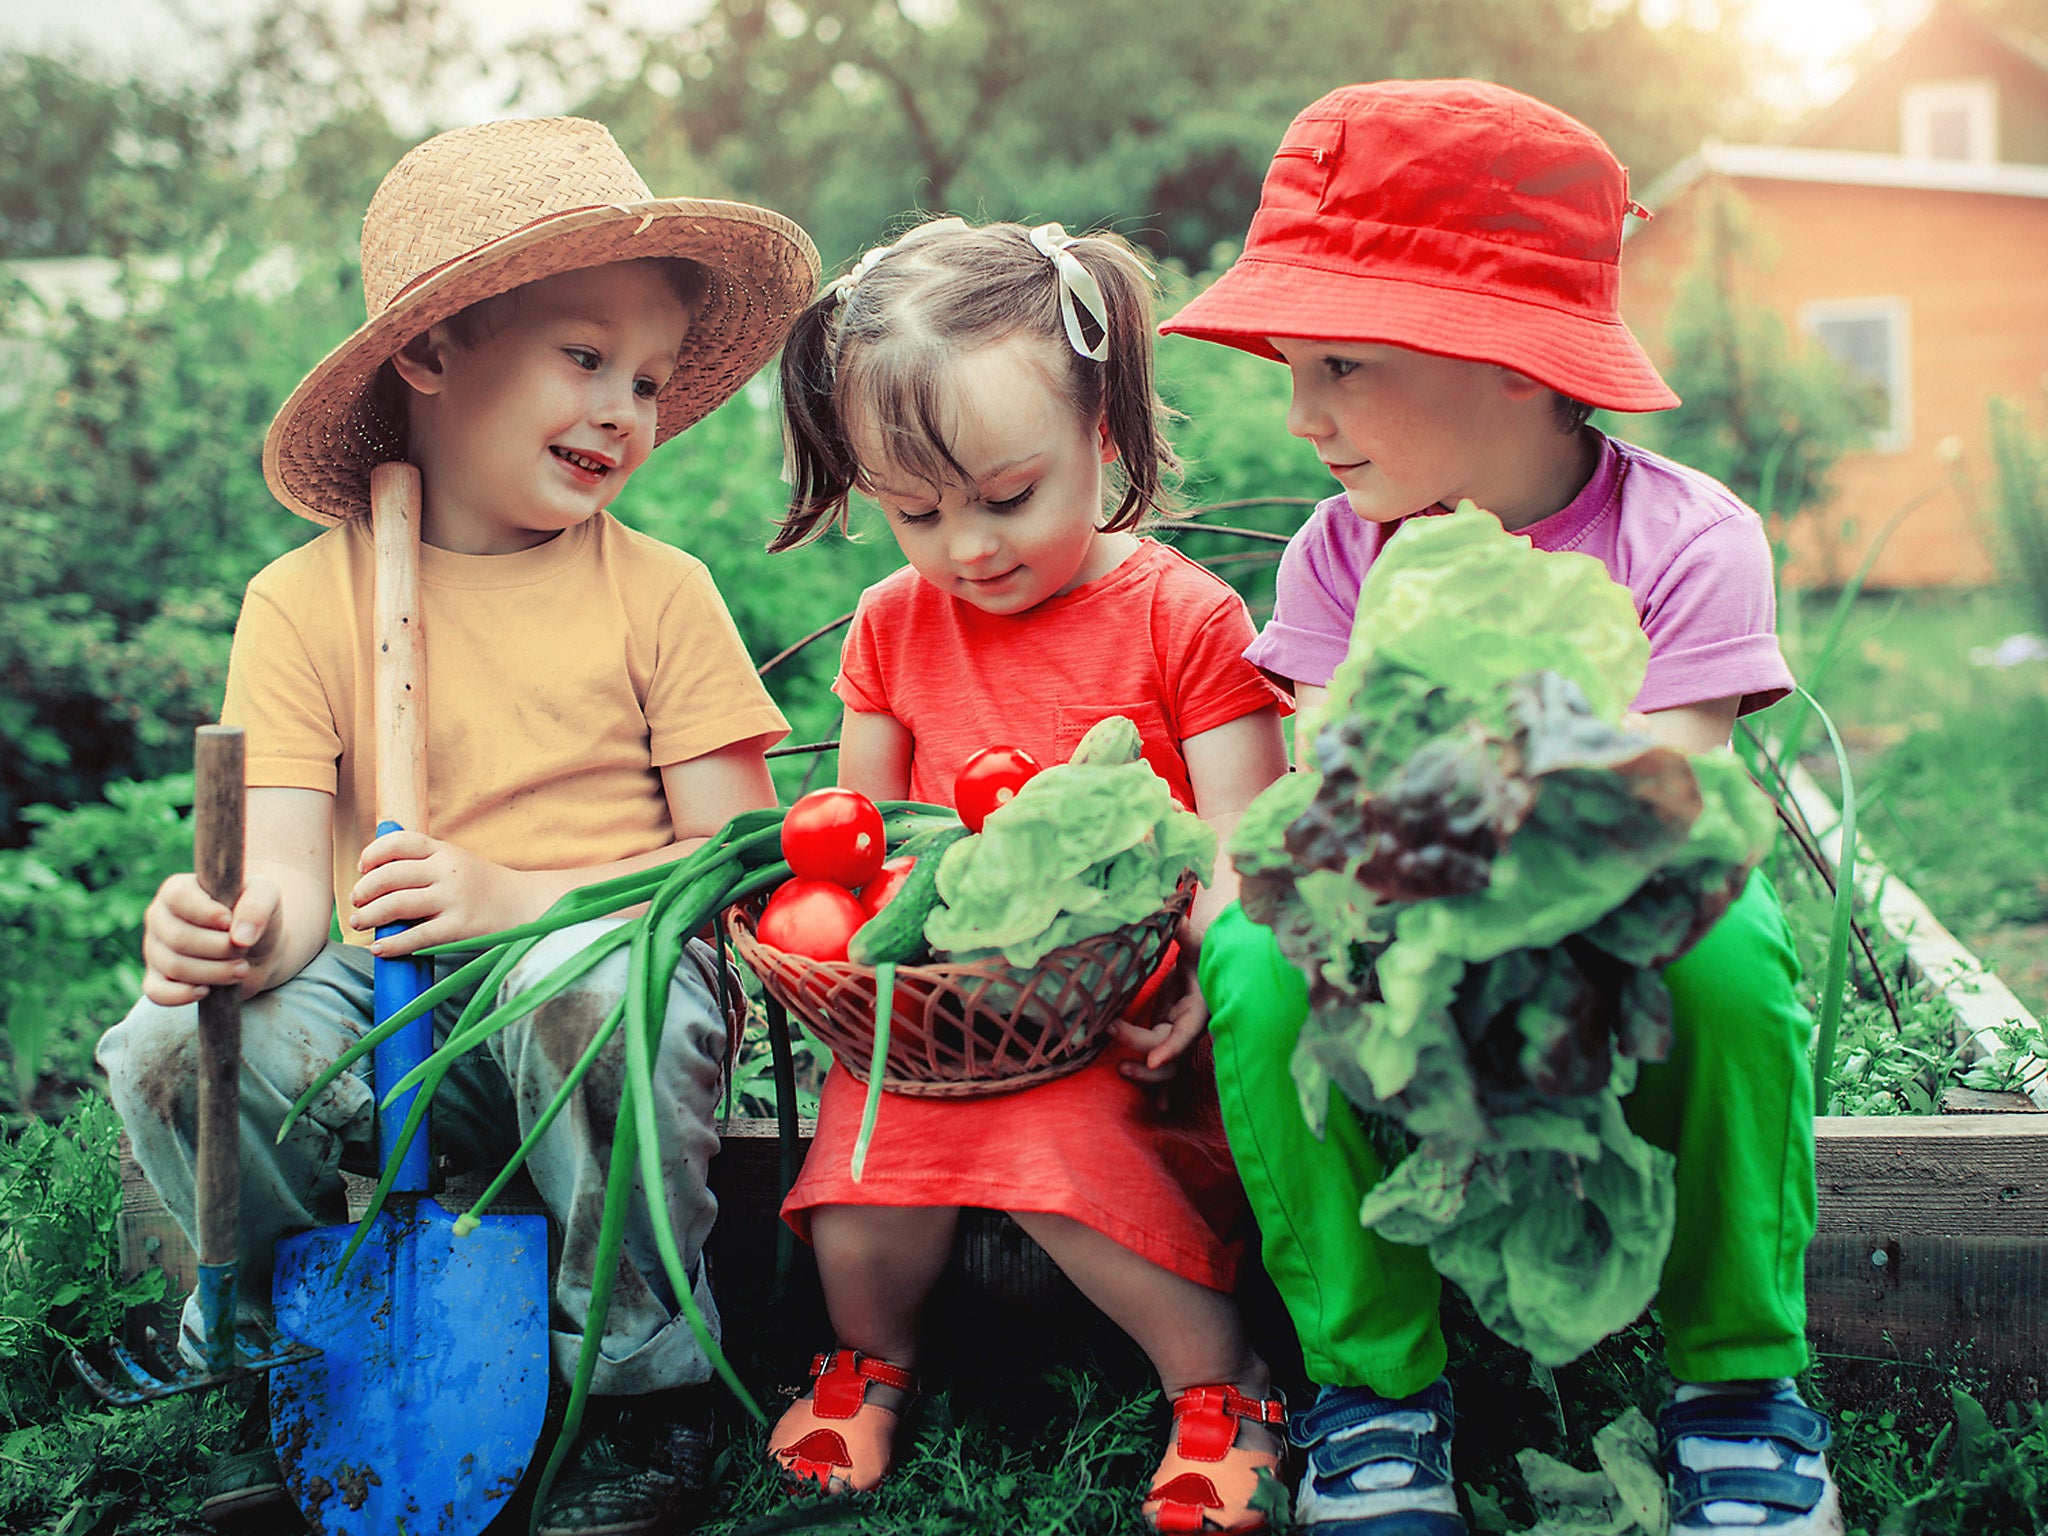 Children who are raised as vegetarians grow and develop at the same rate as meat-eaters